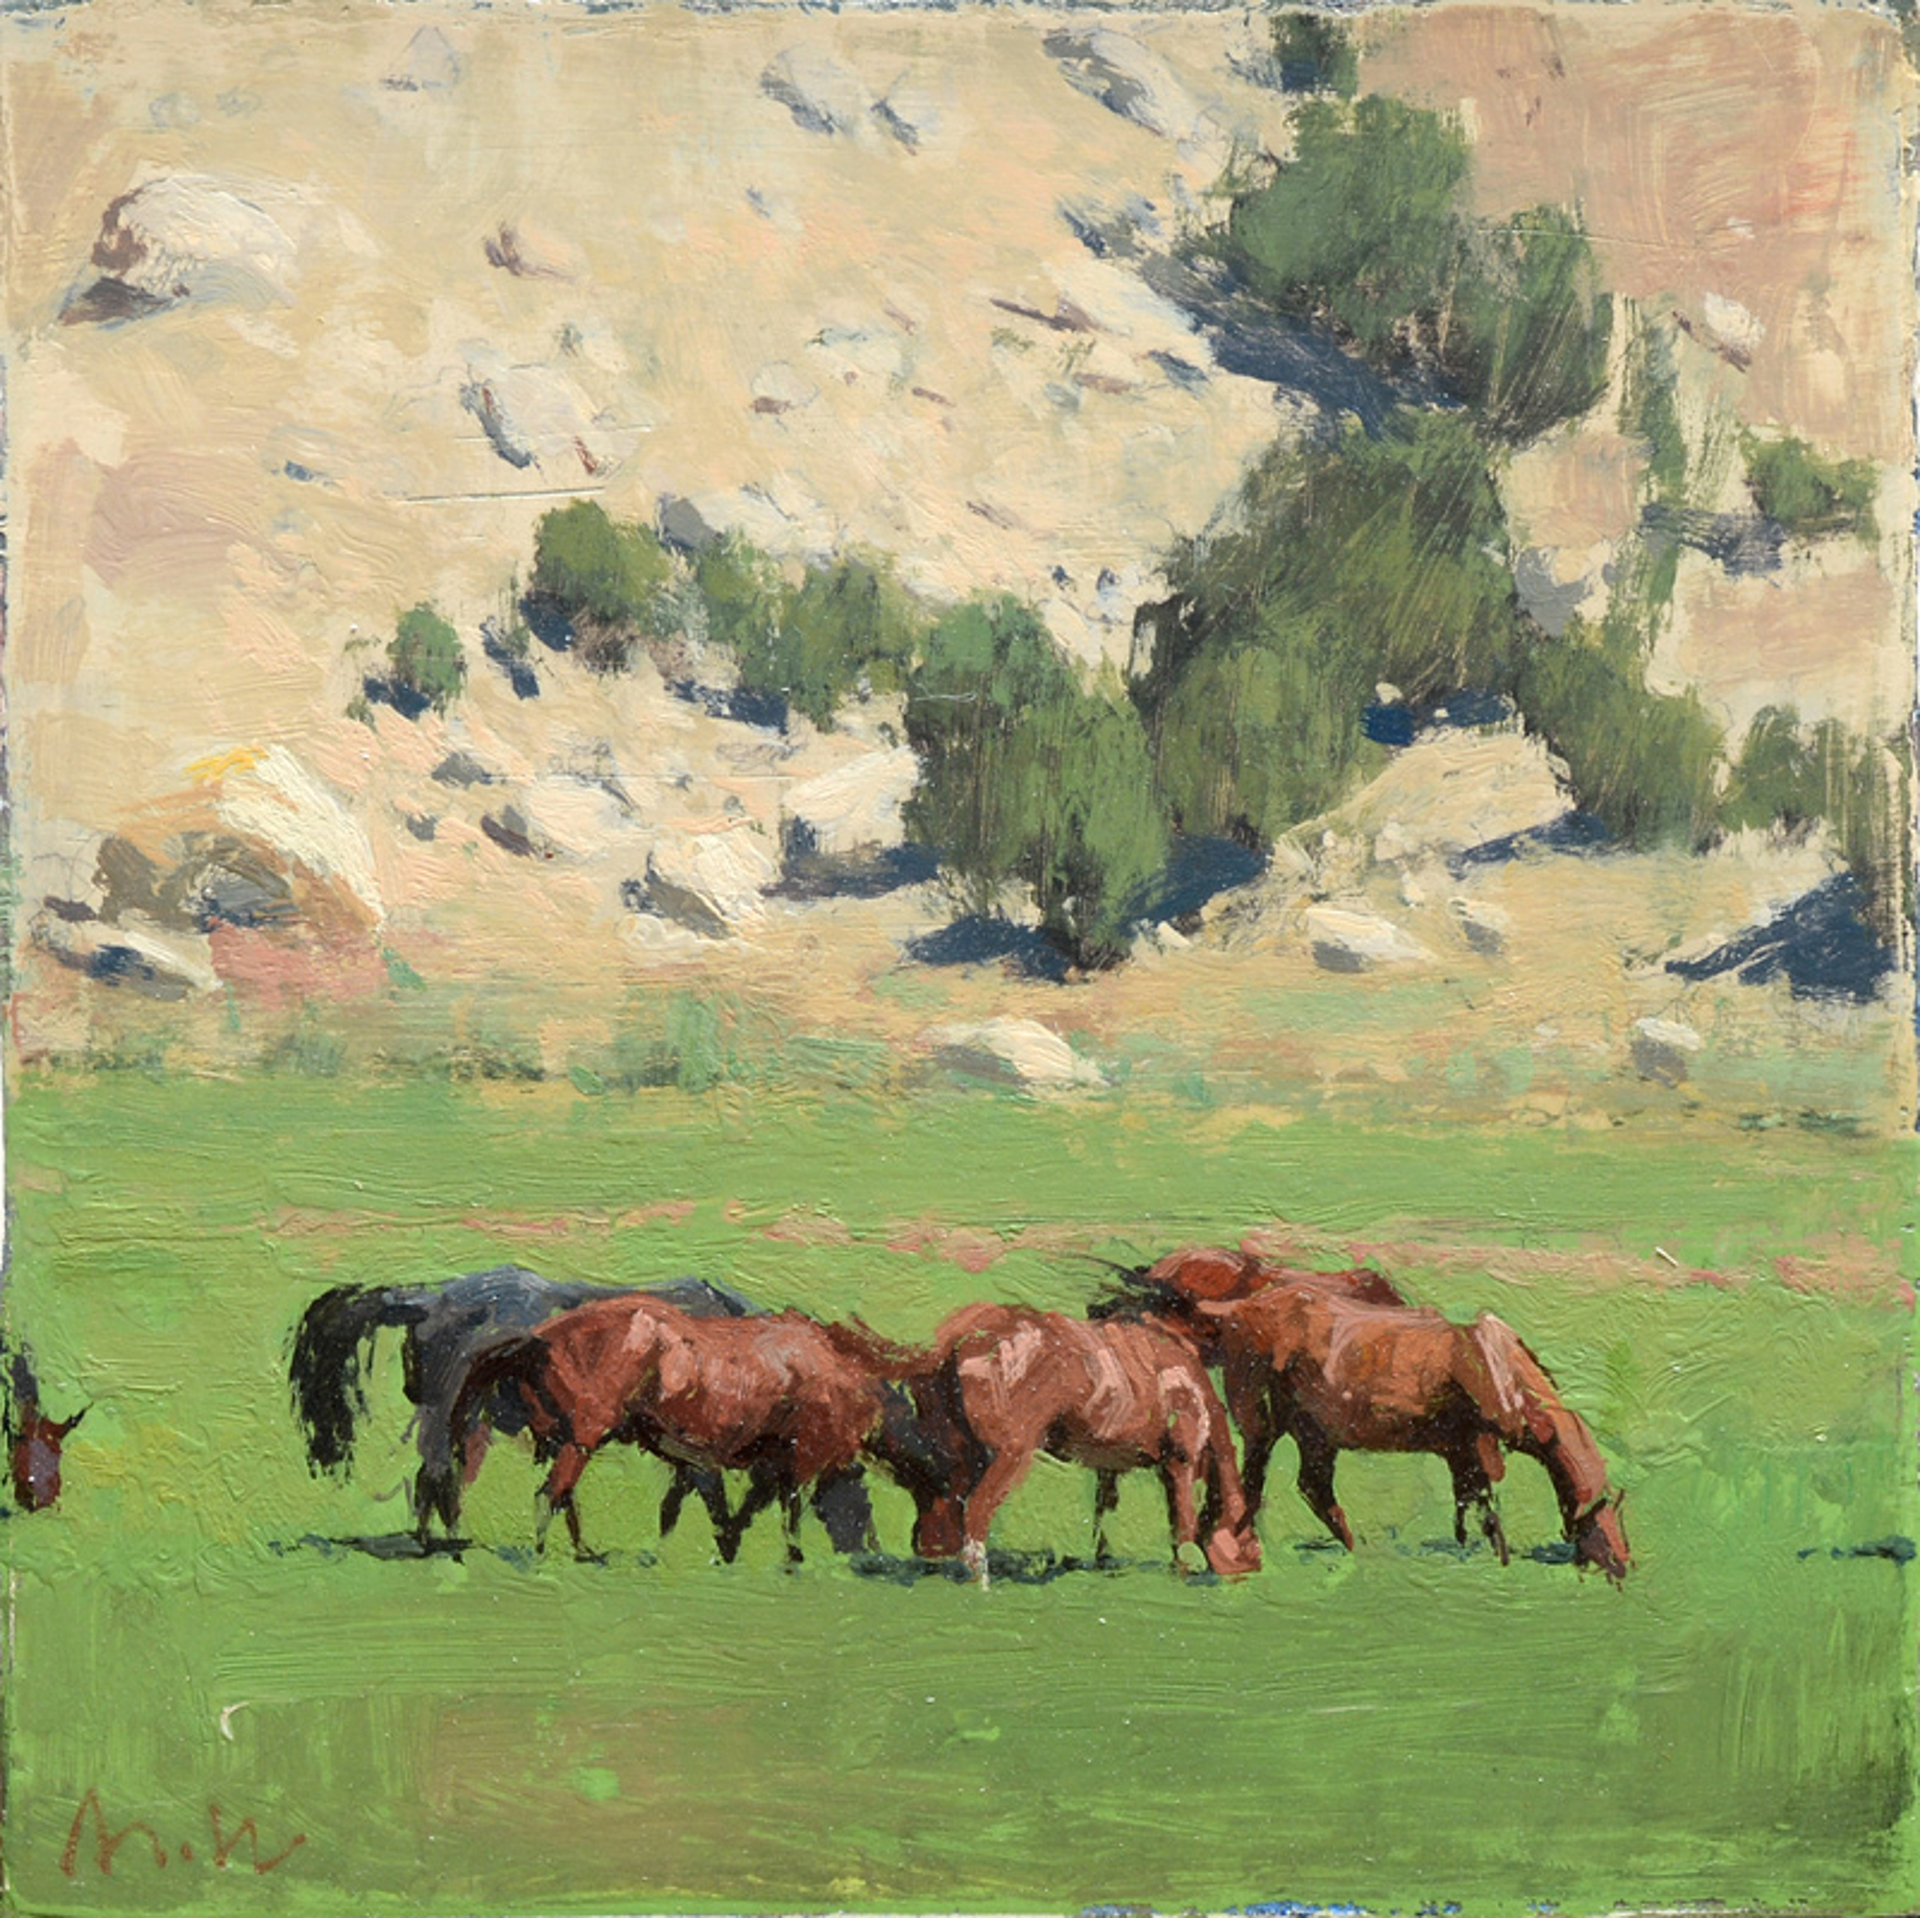 Canyon Horses II by Michael Workman